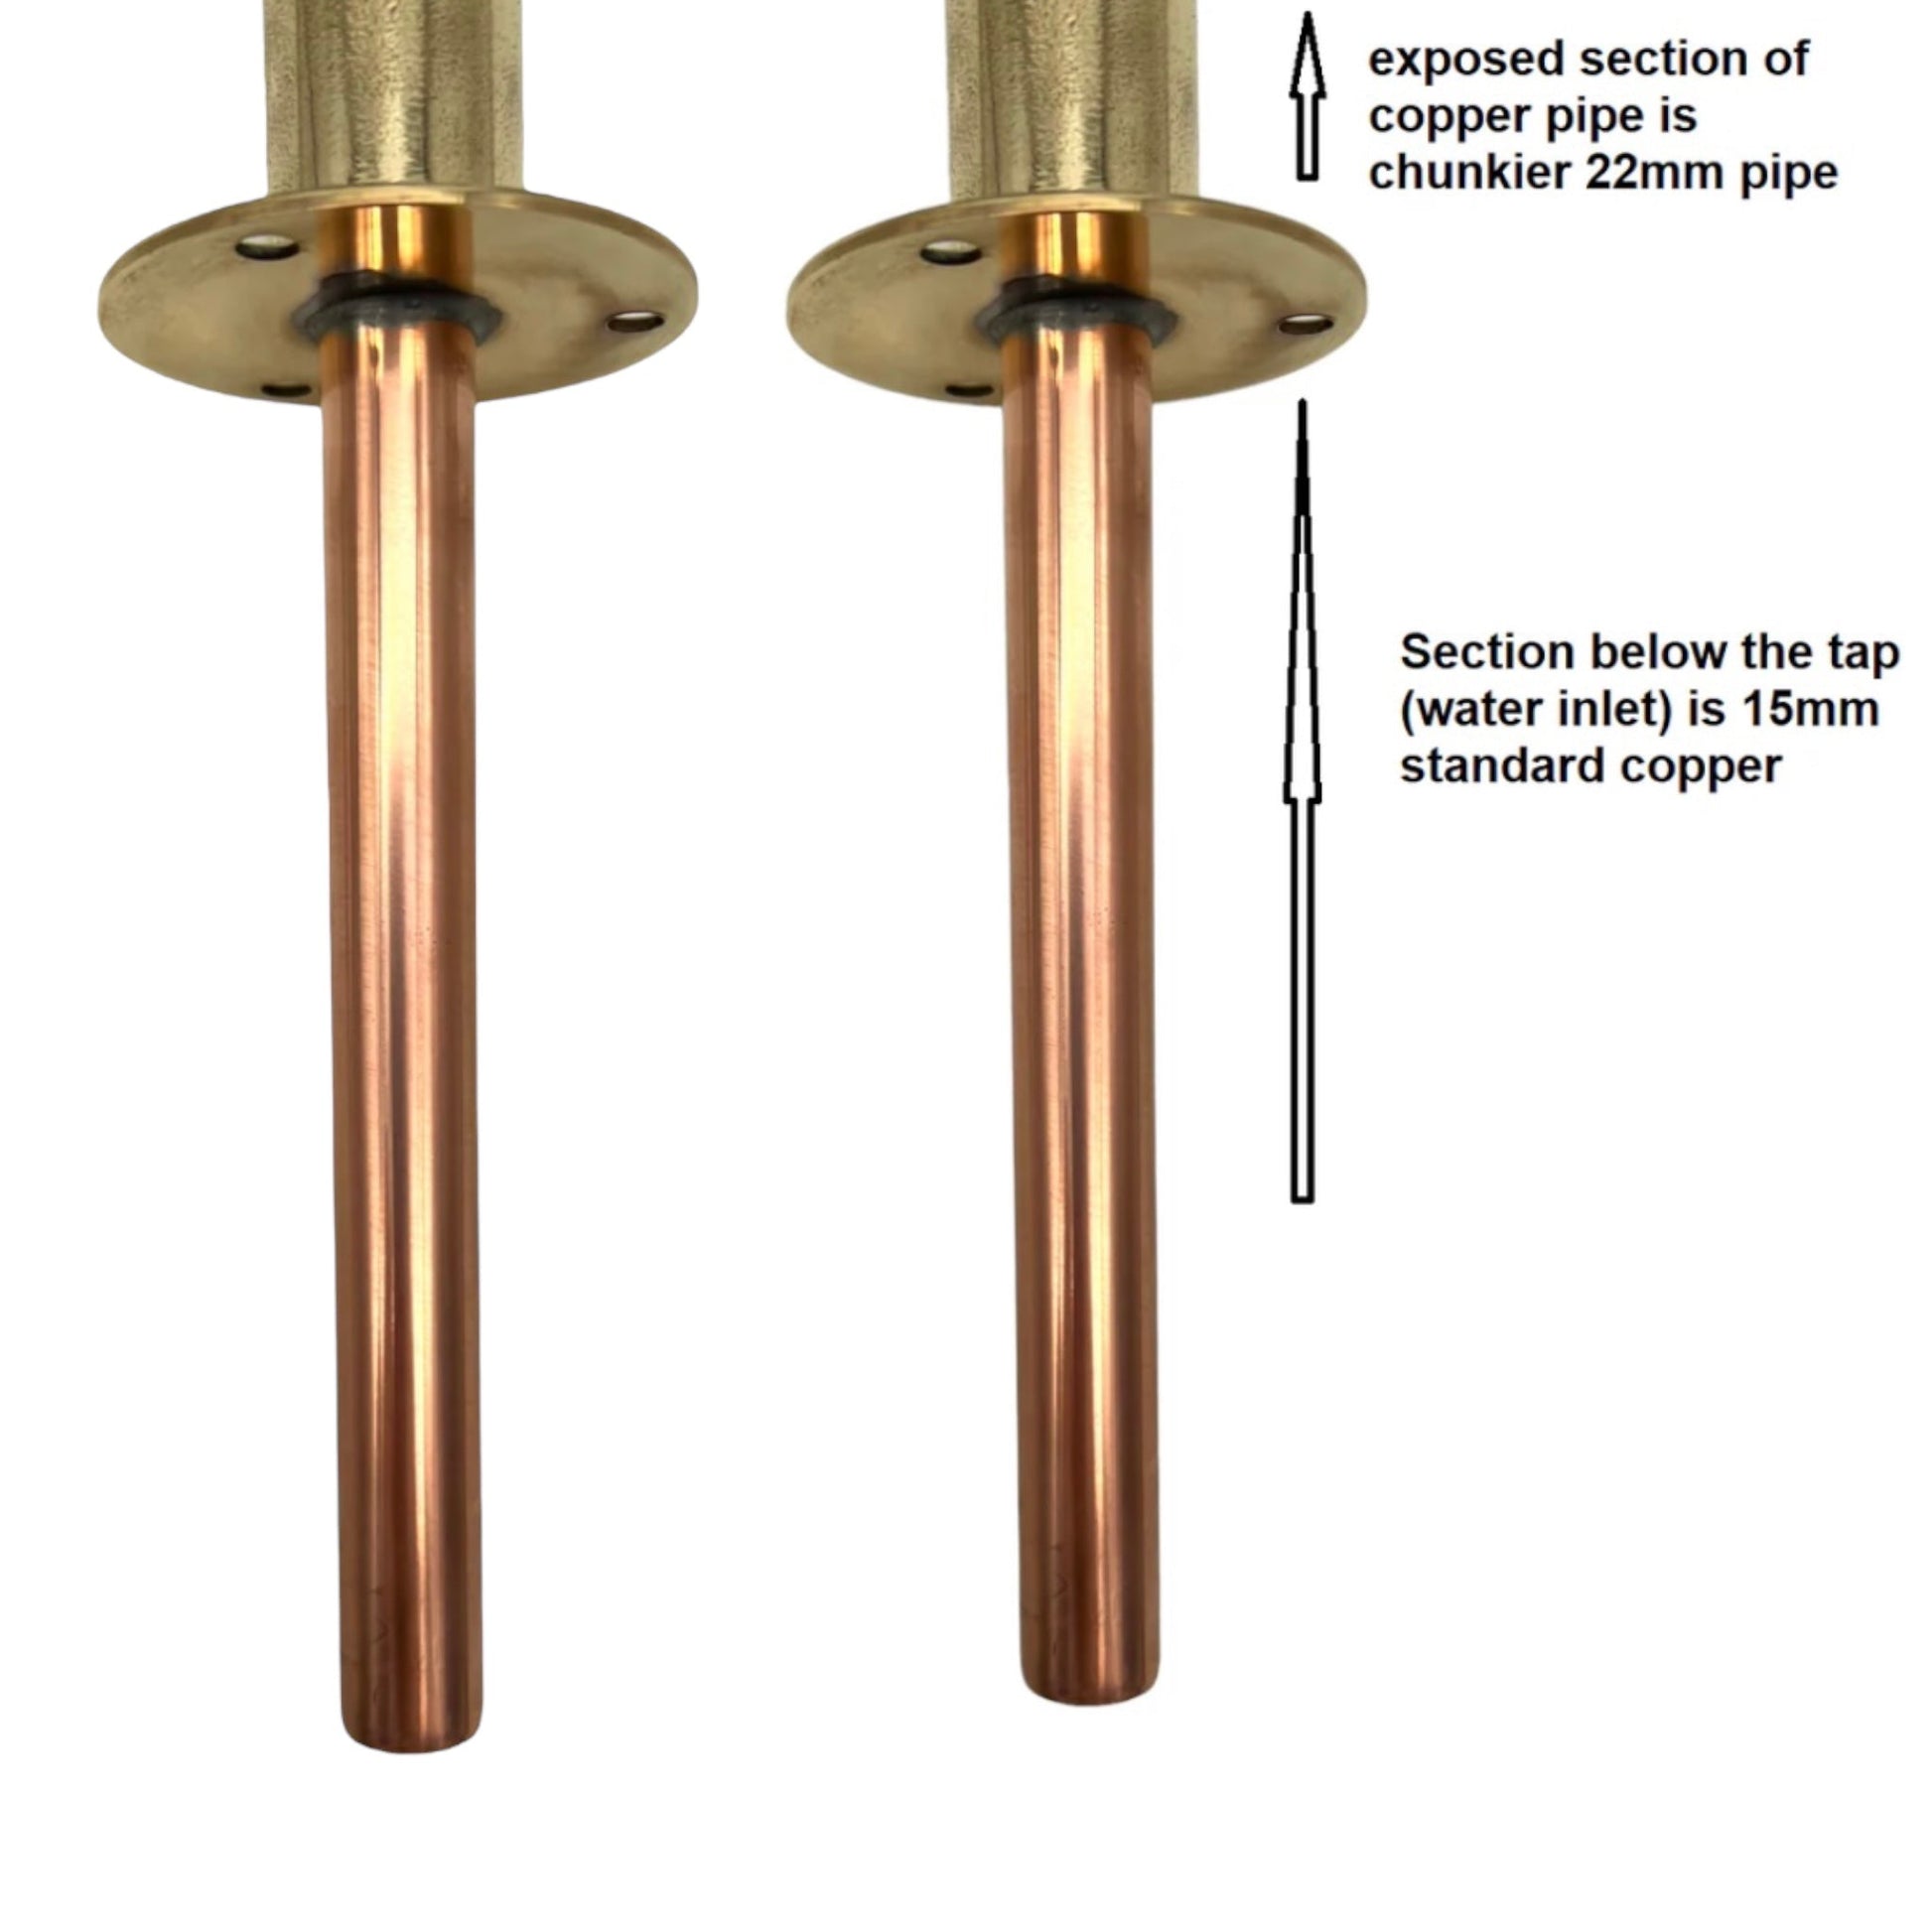 15mm tail ends of copper and brass taps sold by All Things French Store